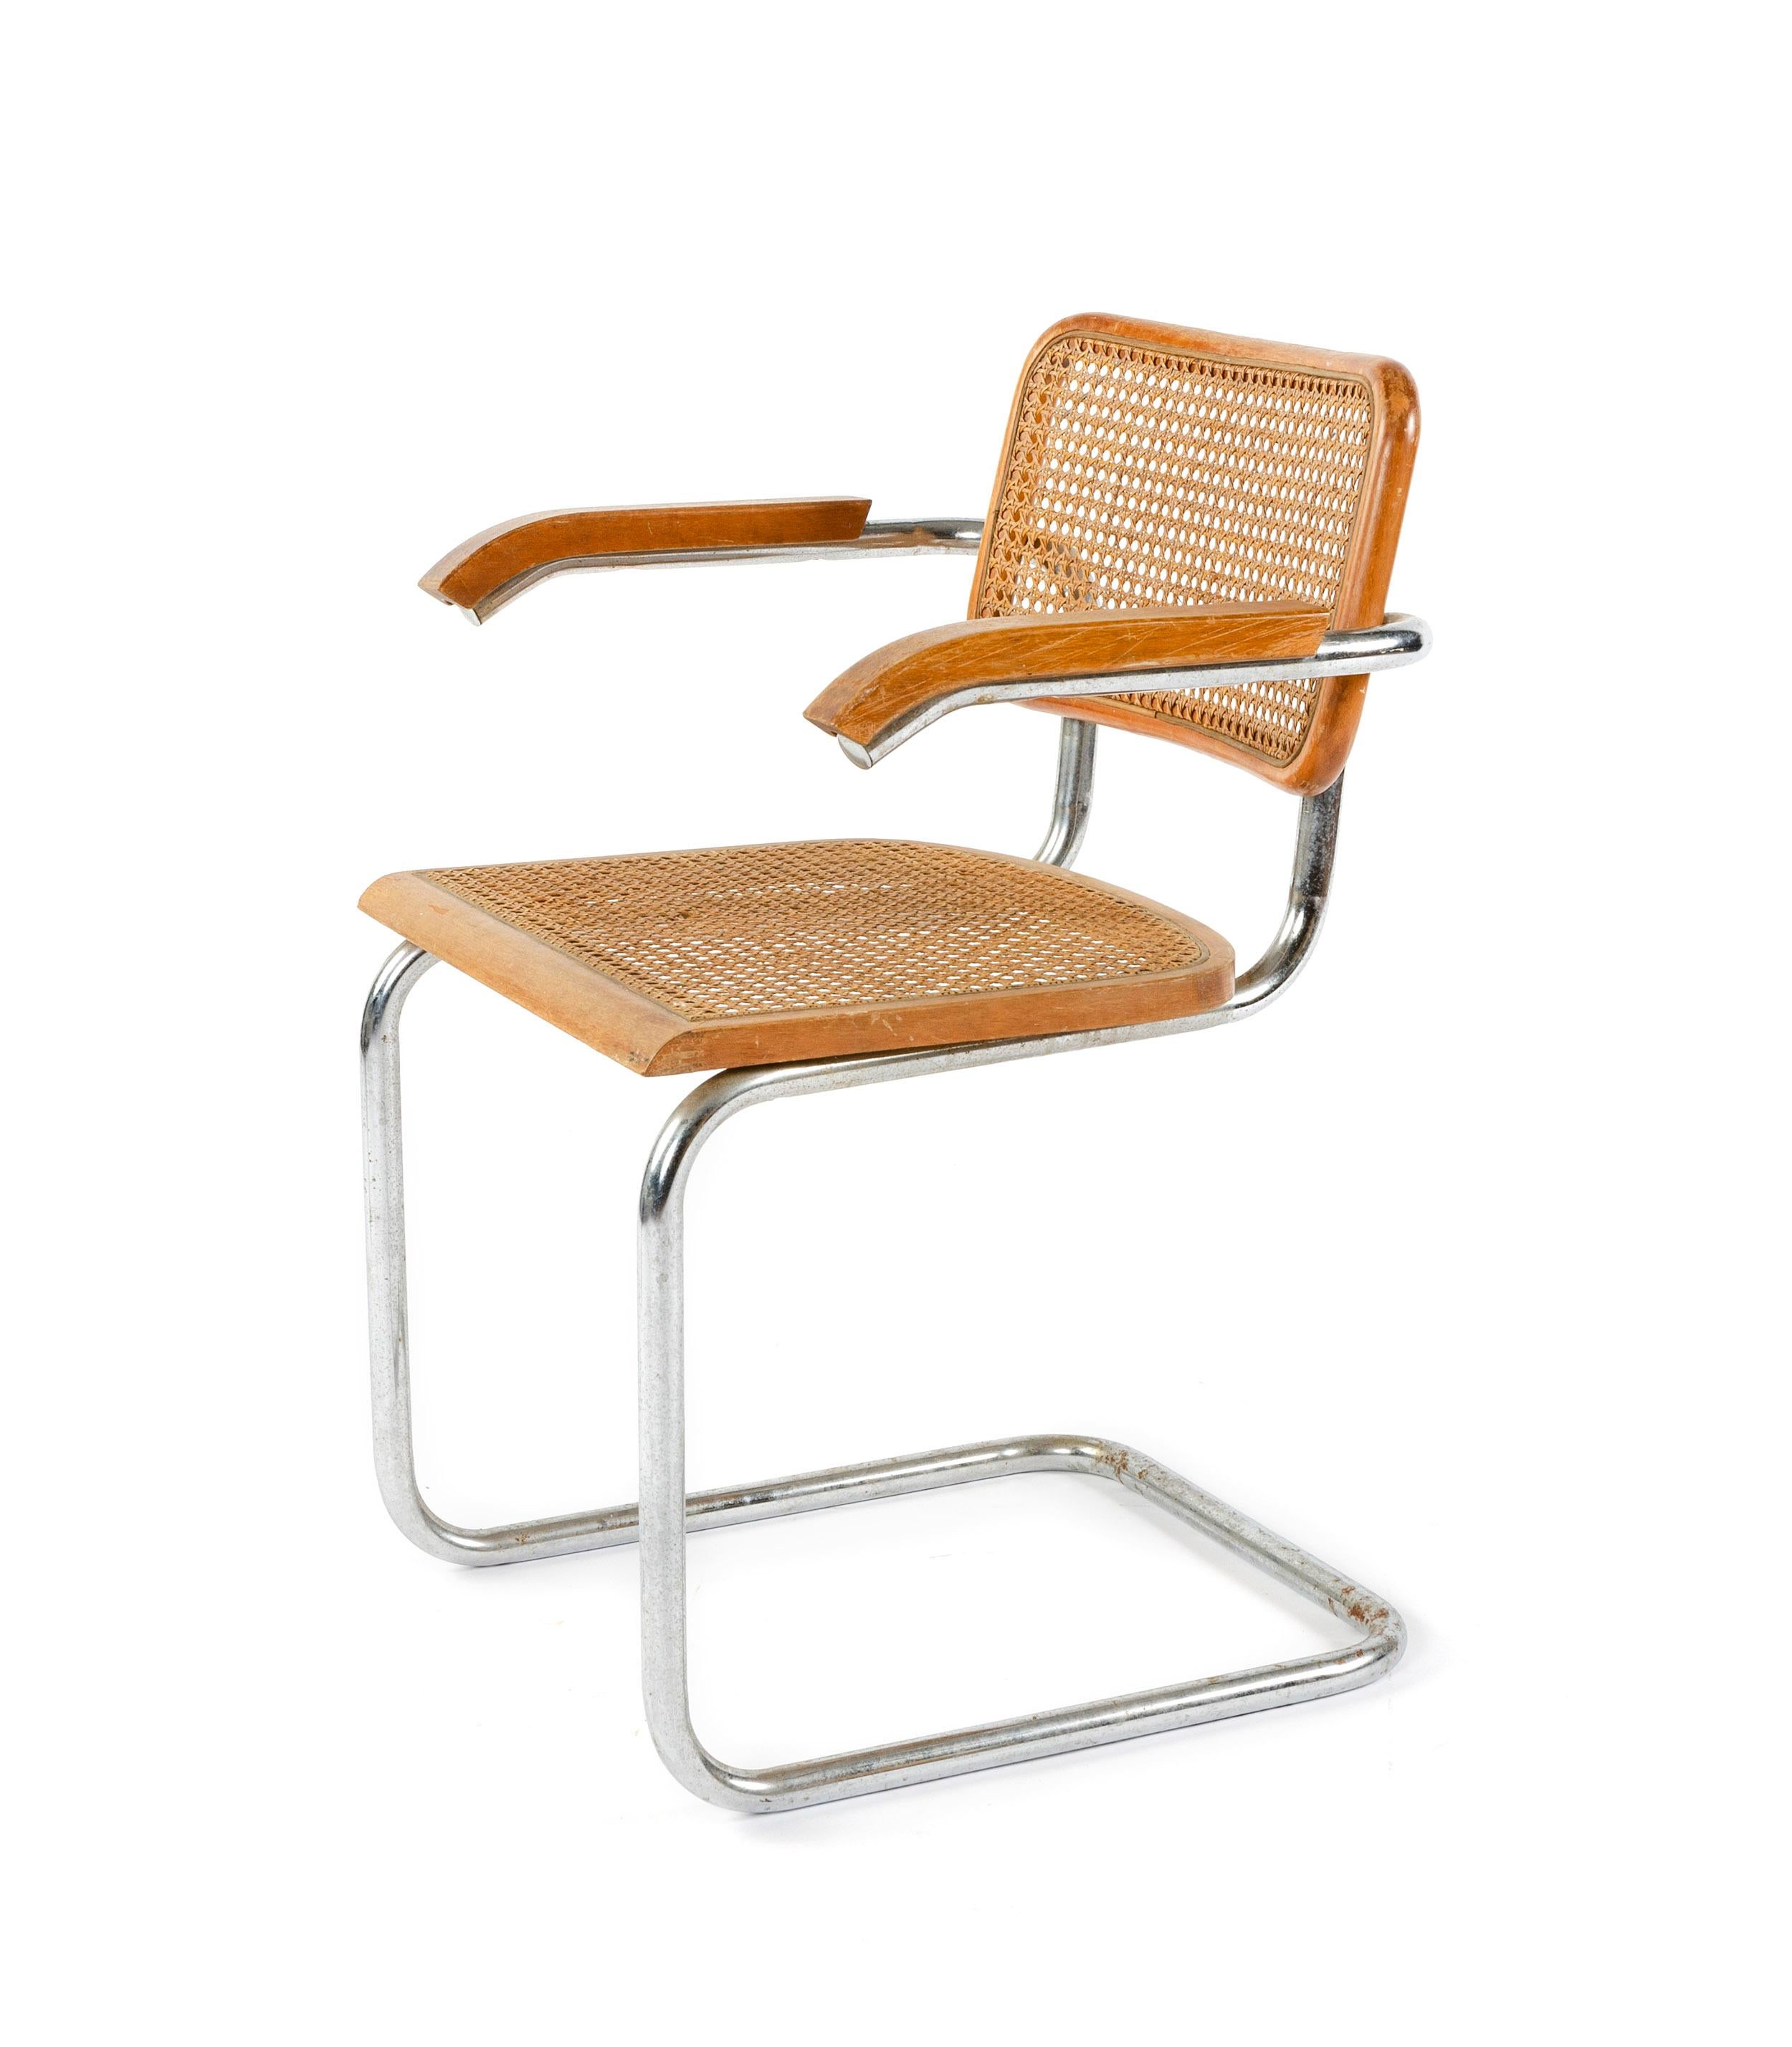 A minimal Cesca armchair designed by Marcel Breuer featuring caned seat and back on a cantilevered tubular chrome frame. Originally from the Levy House in Princeton, NJ, designed by Marcel Breuer, circa 1953. 